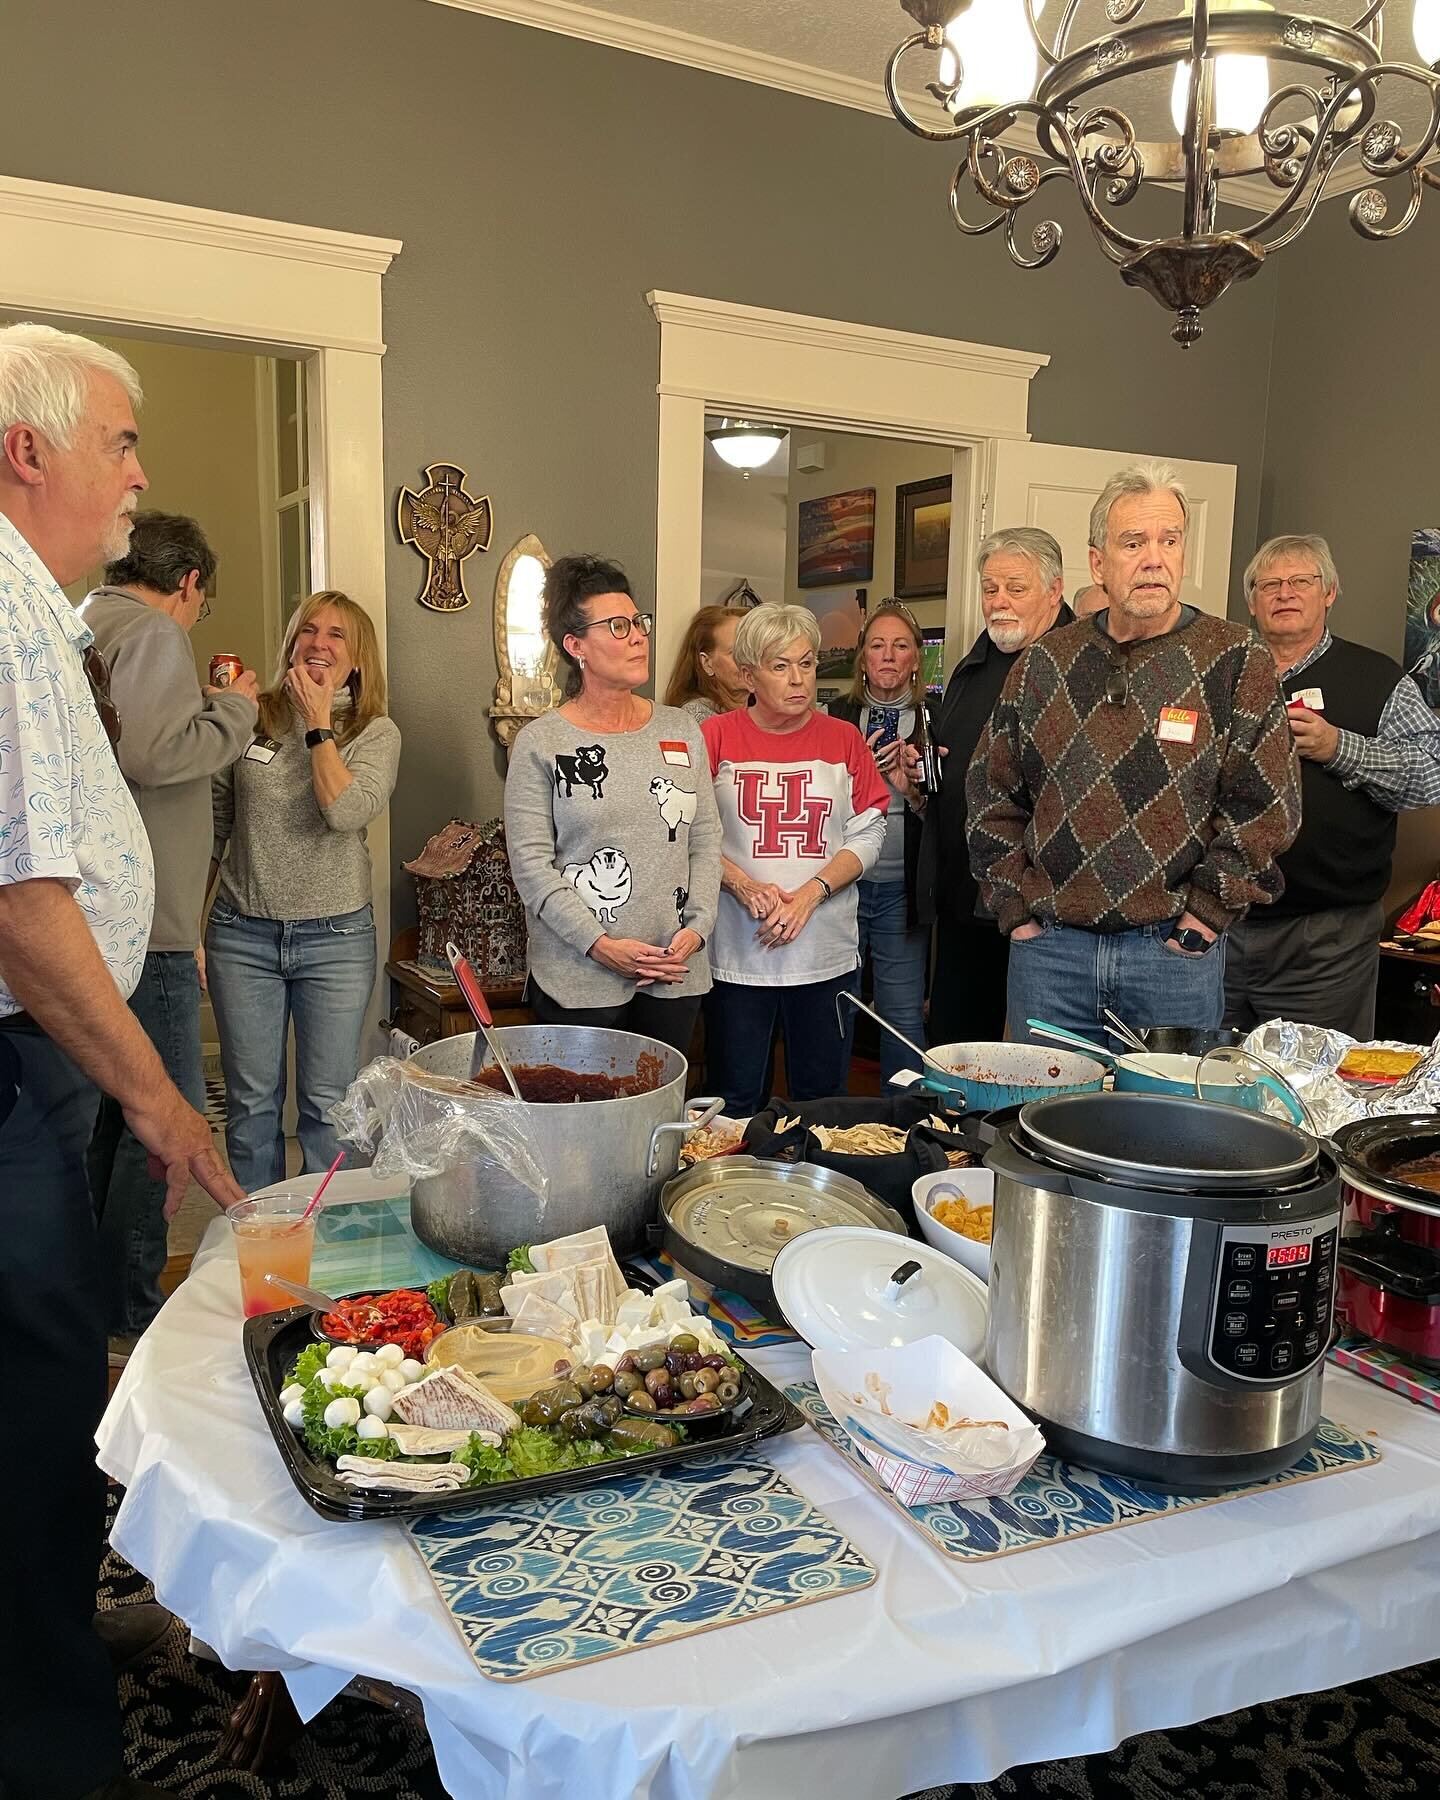 Silk Stocking is a nationally recognized district centered along 25th (Rosenberg) in District 2. Their annual chili cook off is always a great kickoff to Mardi Gras! Great time listening to neighbors passion for the island and issues dear to their he